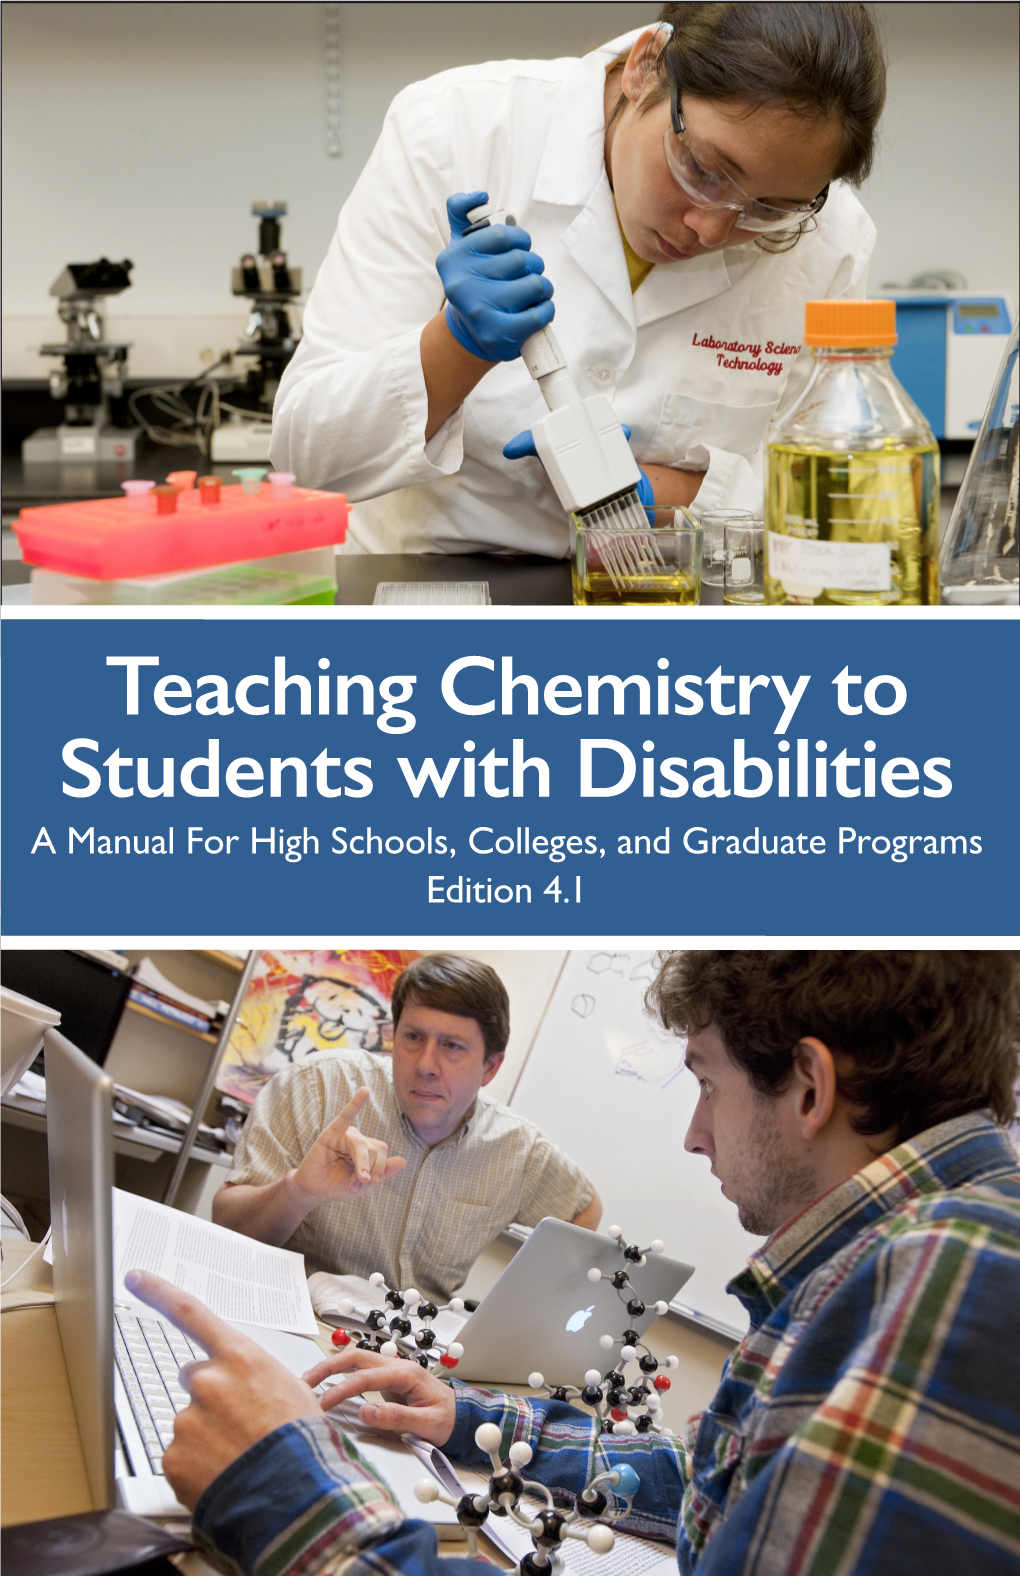 Teaching Chemistry to Students with Disabilities a Manual for High Schools, Colleges, and Graduate Programs Edition 4.1